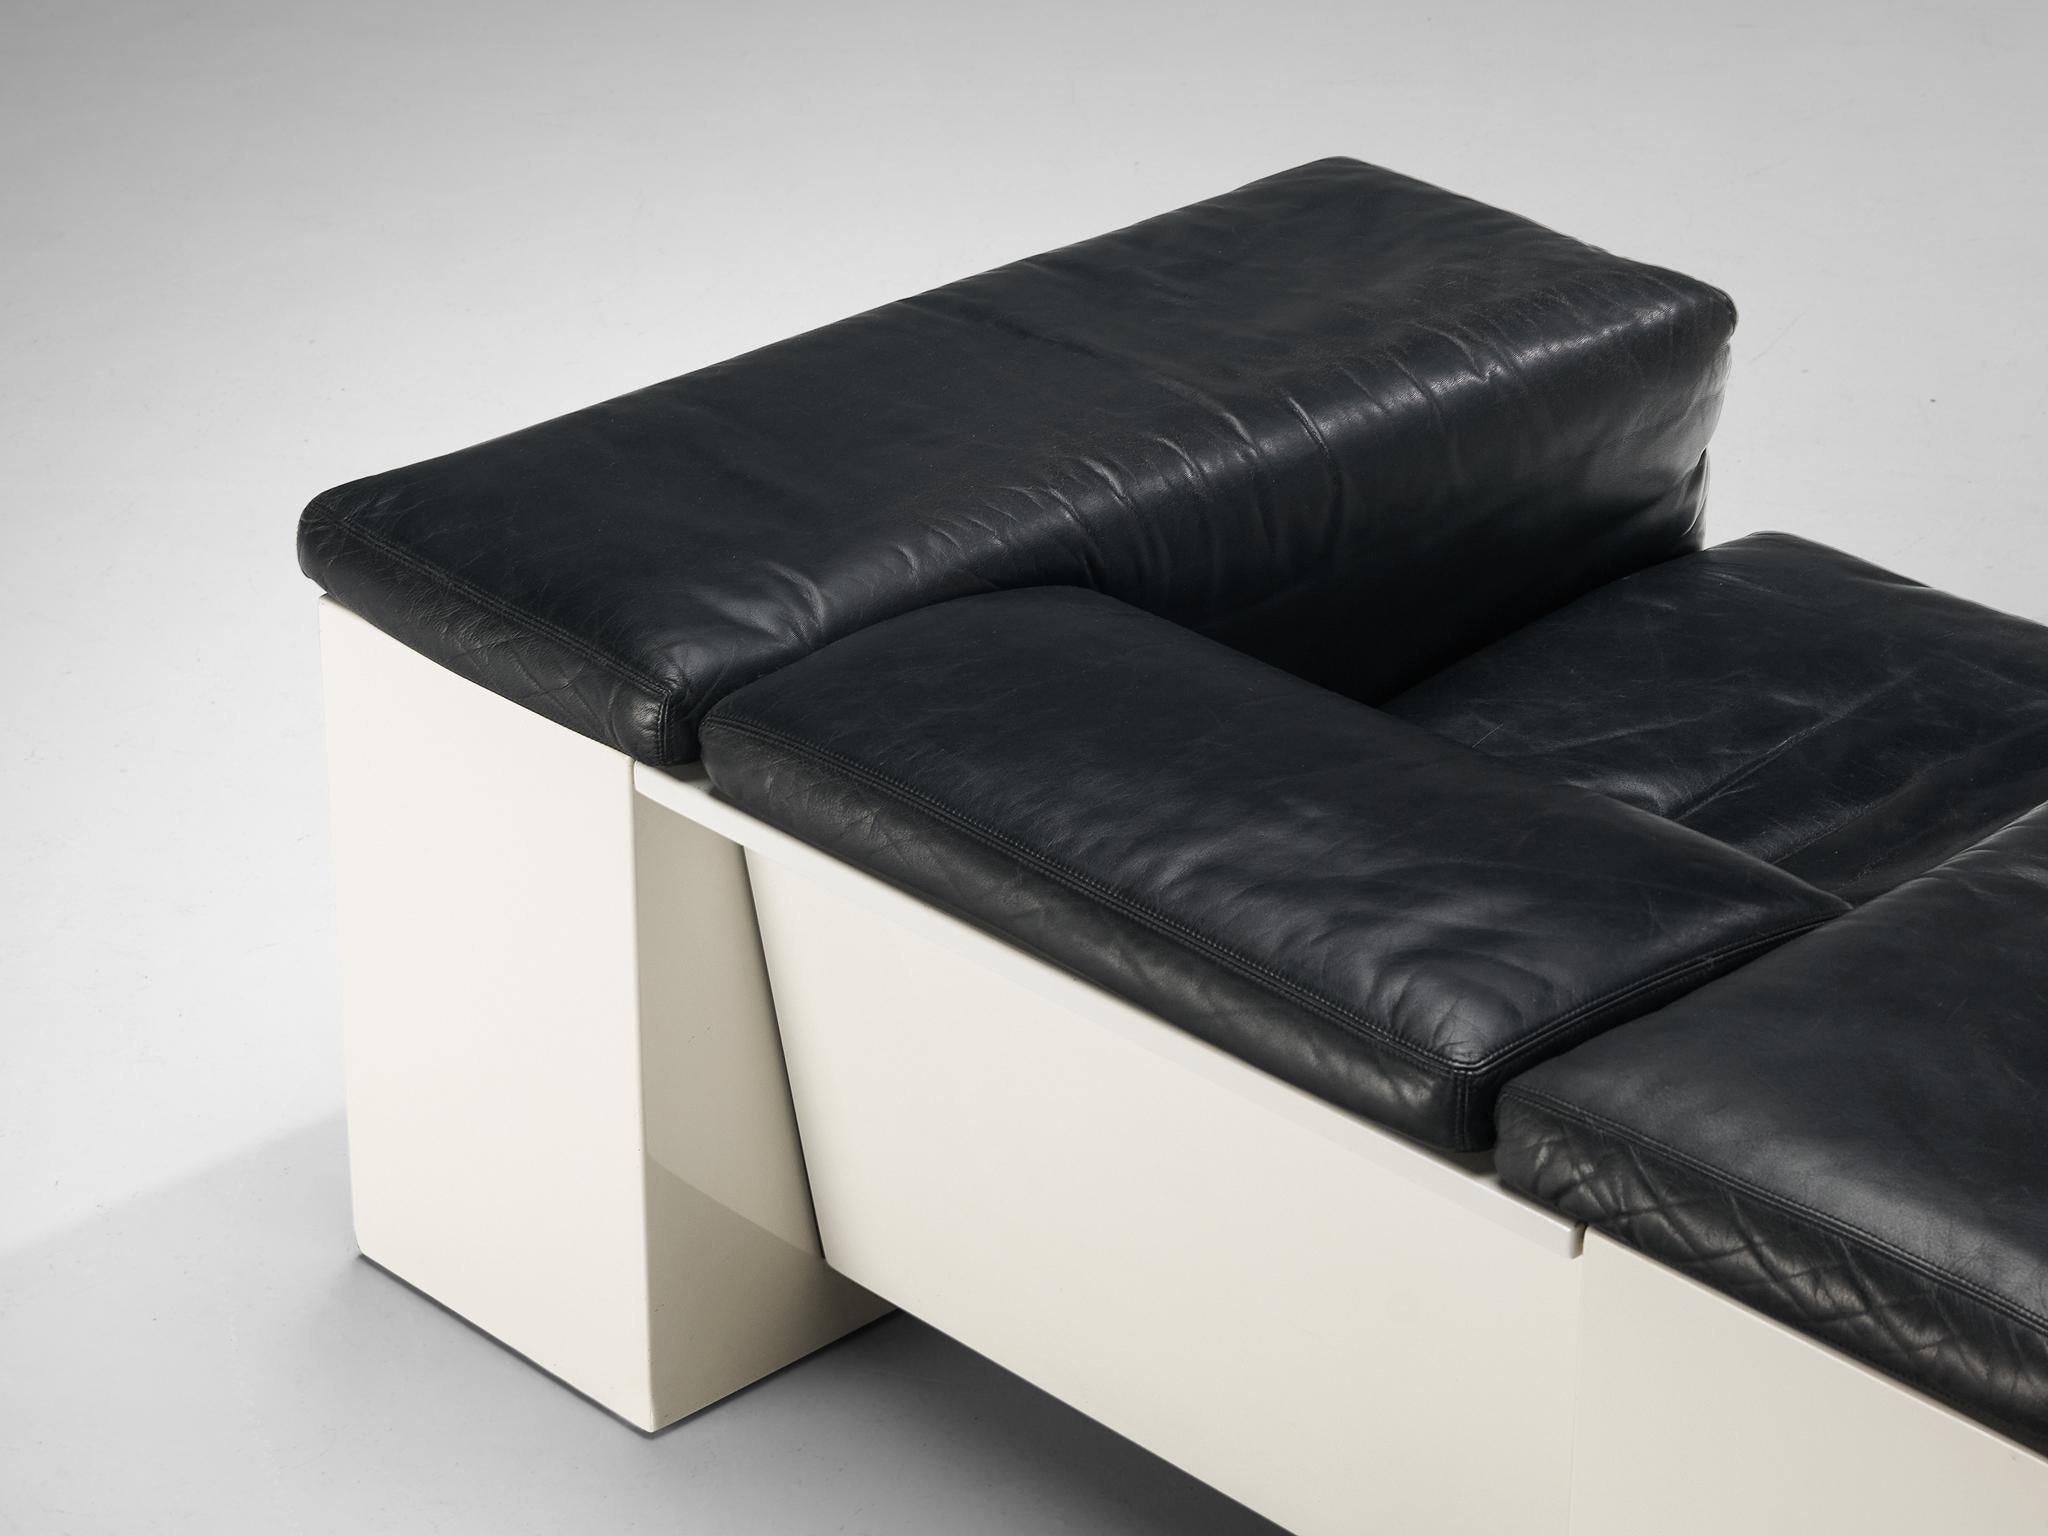 Cini Boeri for Knoll 'Brigadiere' Living Room Set in Black Leather 5